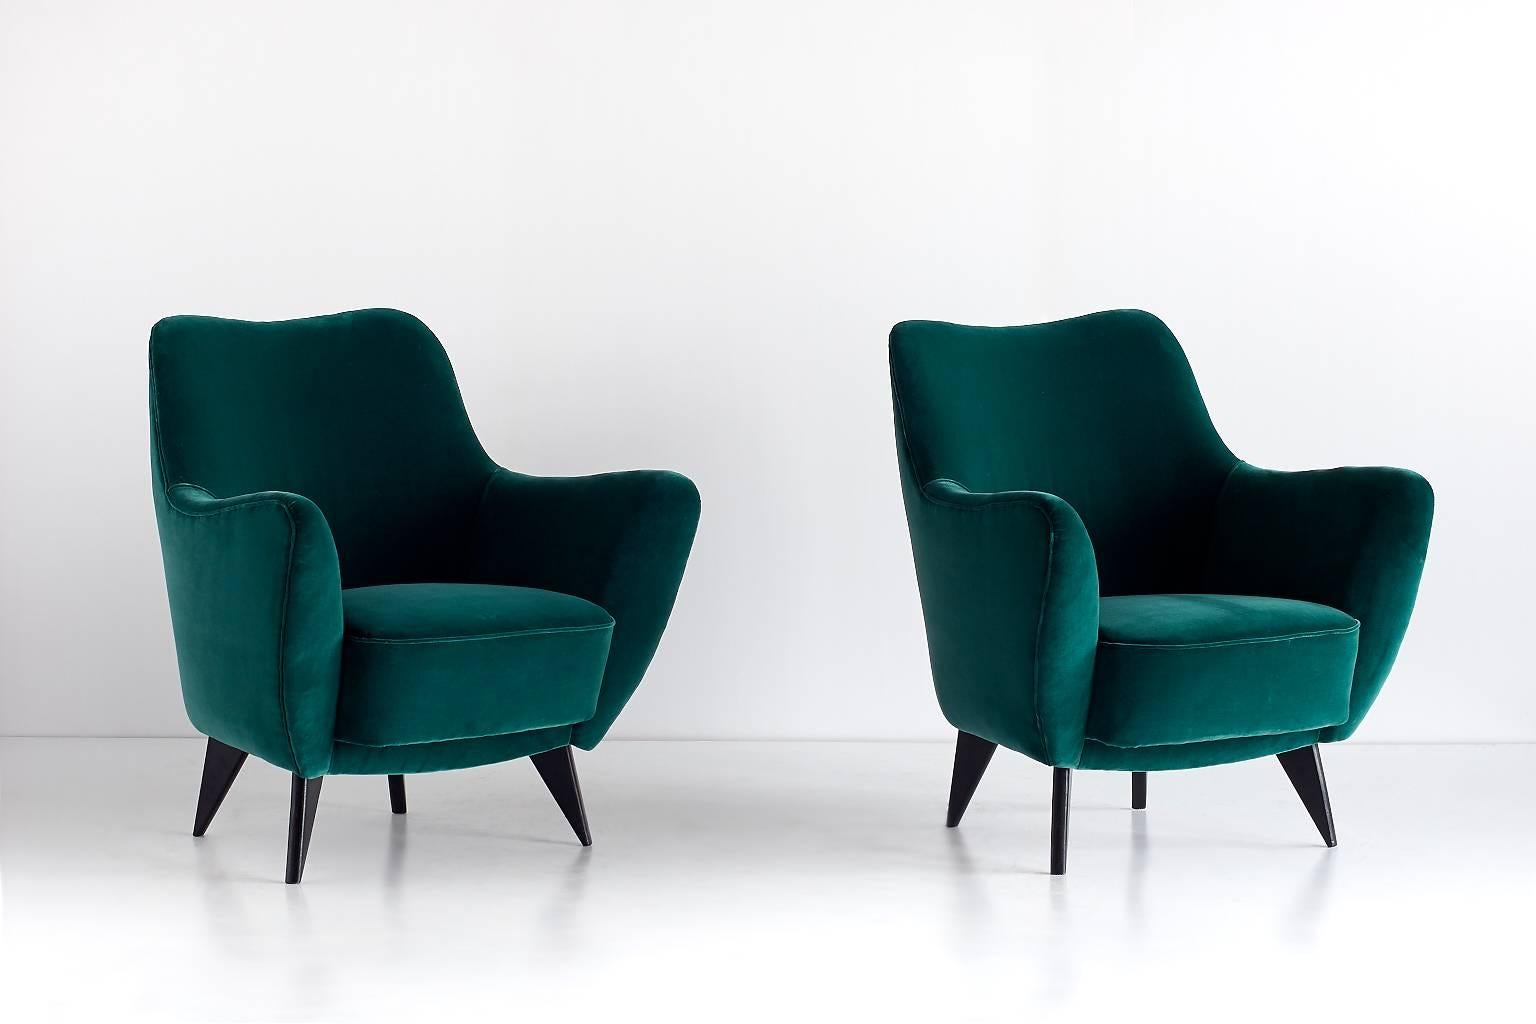 A pair of Perla armchairs designed by Giulia Veronesi and produced by ISA Bergamo, Italy. Its sensual curves and the elegantly tapered legs give the chair a sculptural and modern feel. These sumptuous armchairs have been fully reconditioned and